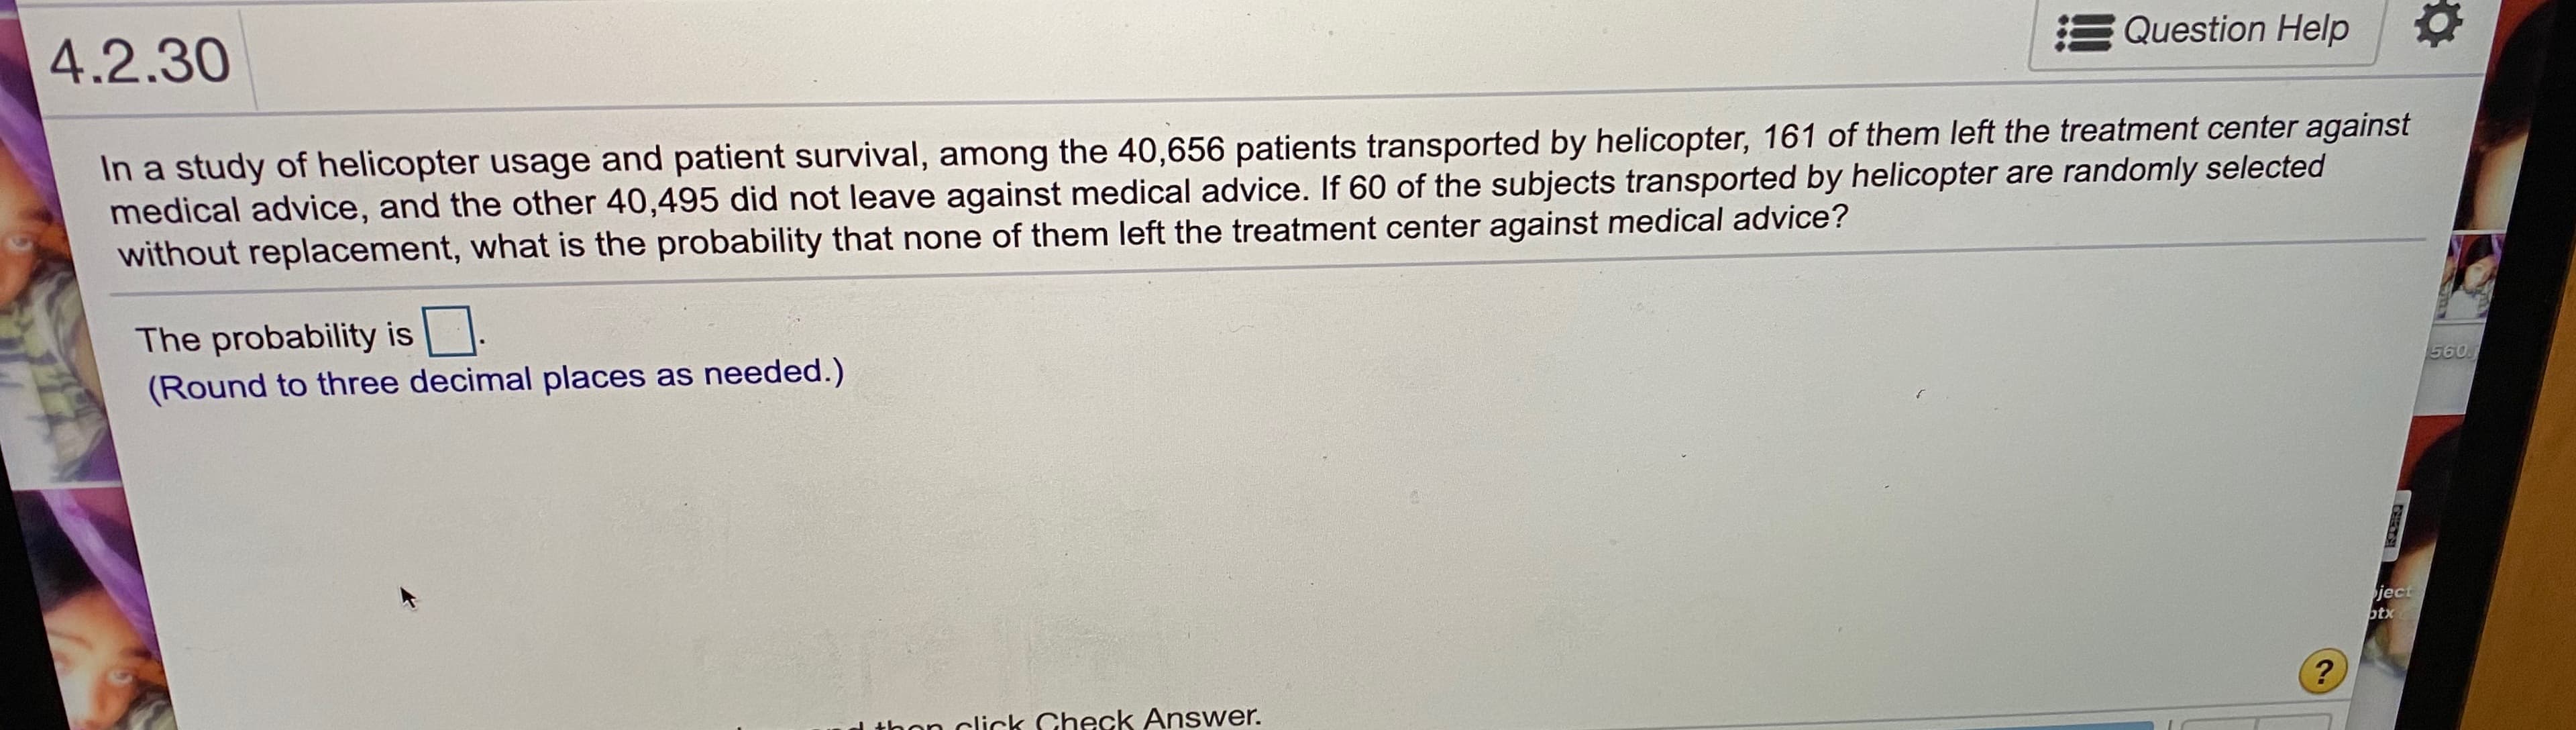 In a study of helicopter usage and patient survival, among the 40,656 patients transported by helicopter, 161 of them left the treatment center against
medical advice, and the other 40,495 did not leave against medical advice. If 60 of the subjects transported by helicopter are randomly selected
without replacement, what is the probability that none of them left the treatment center against medical advice?
